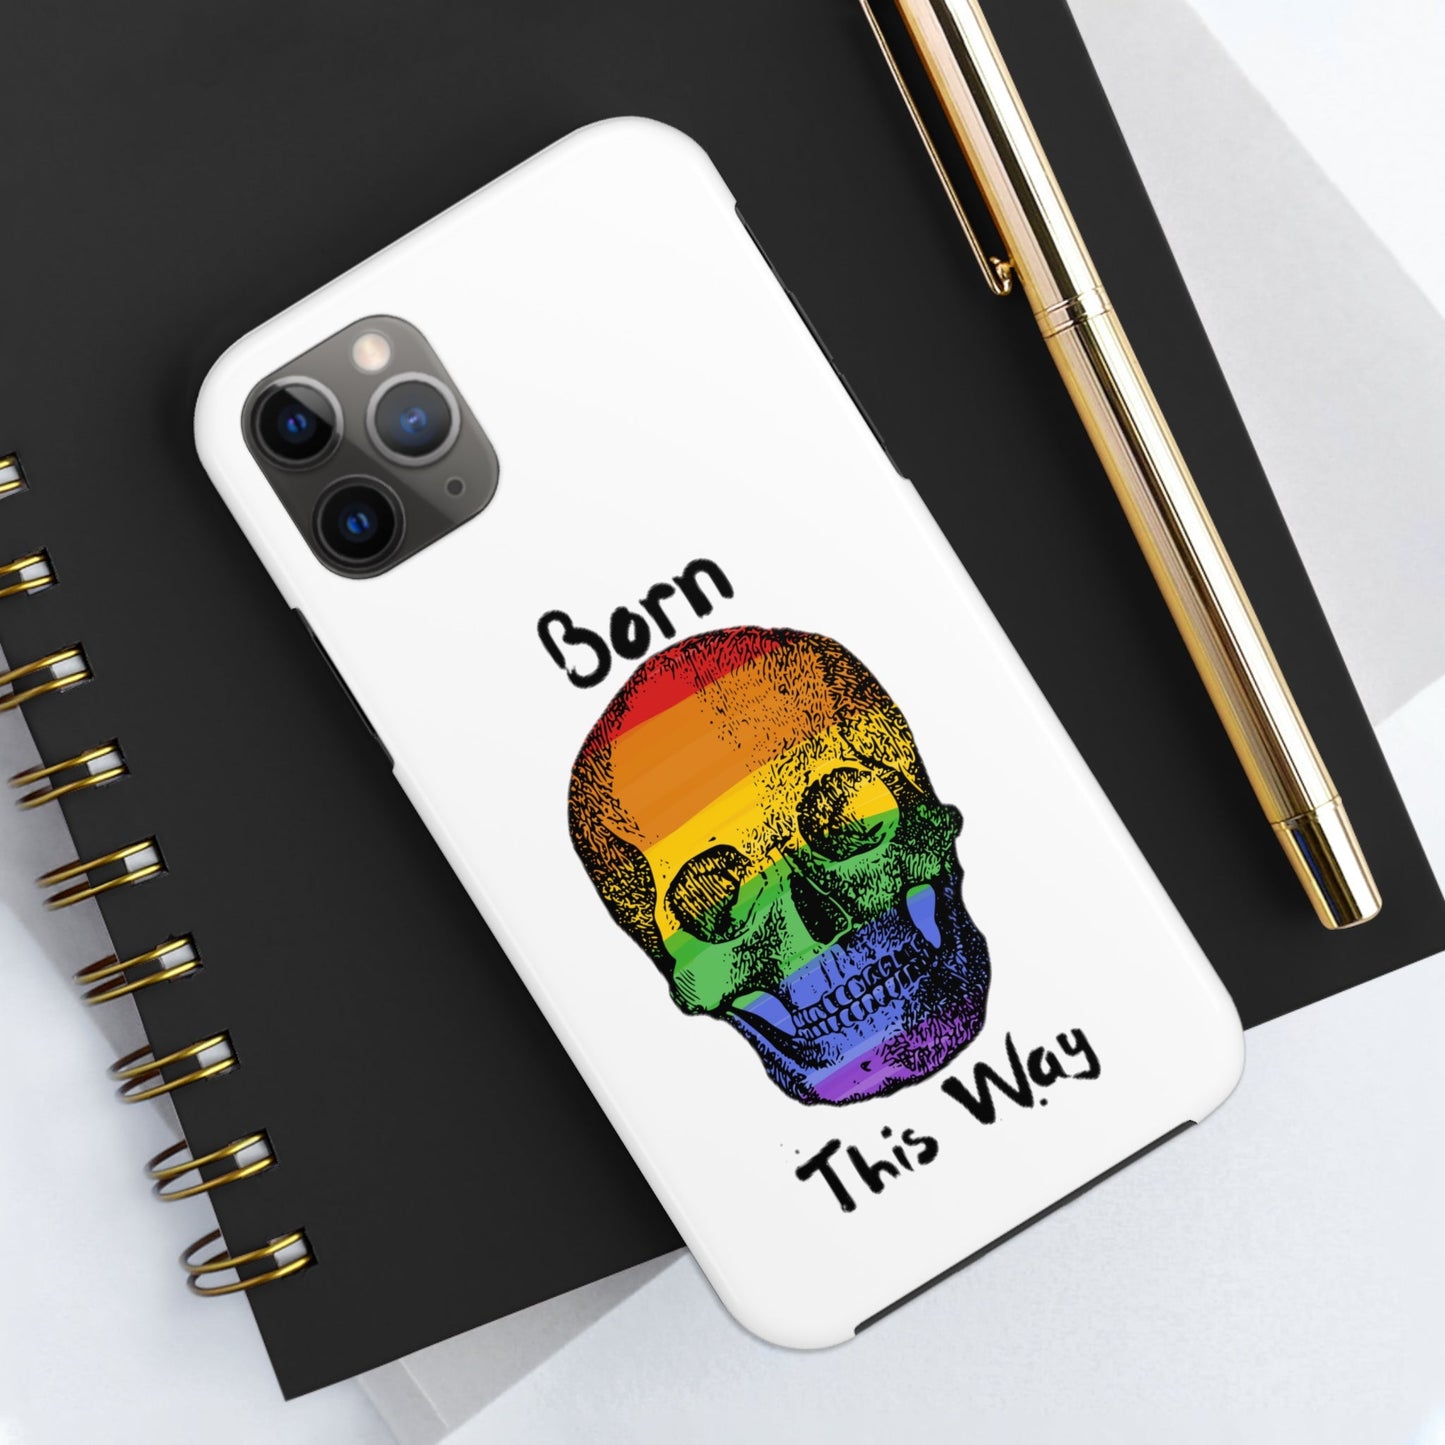 Born This Way Skeleton Pride Tough Phone Cases for iPhone 7, 8, X, 11, 12, 13, 14 and morePhone CaseVTZdesignsiPhone 11 Pro MaxAccessoriesGlossyiPhone Cases